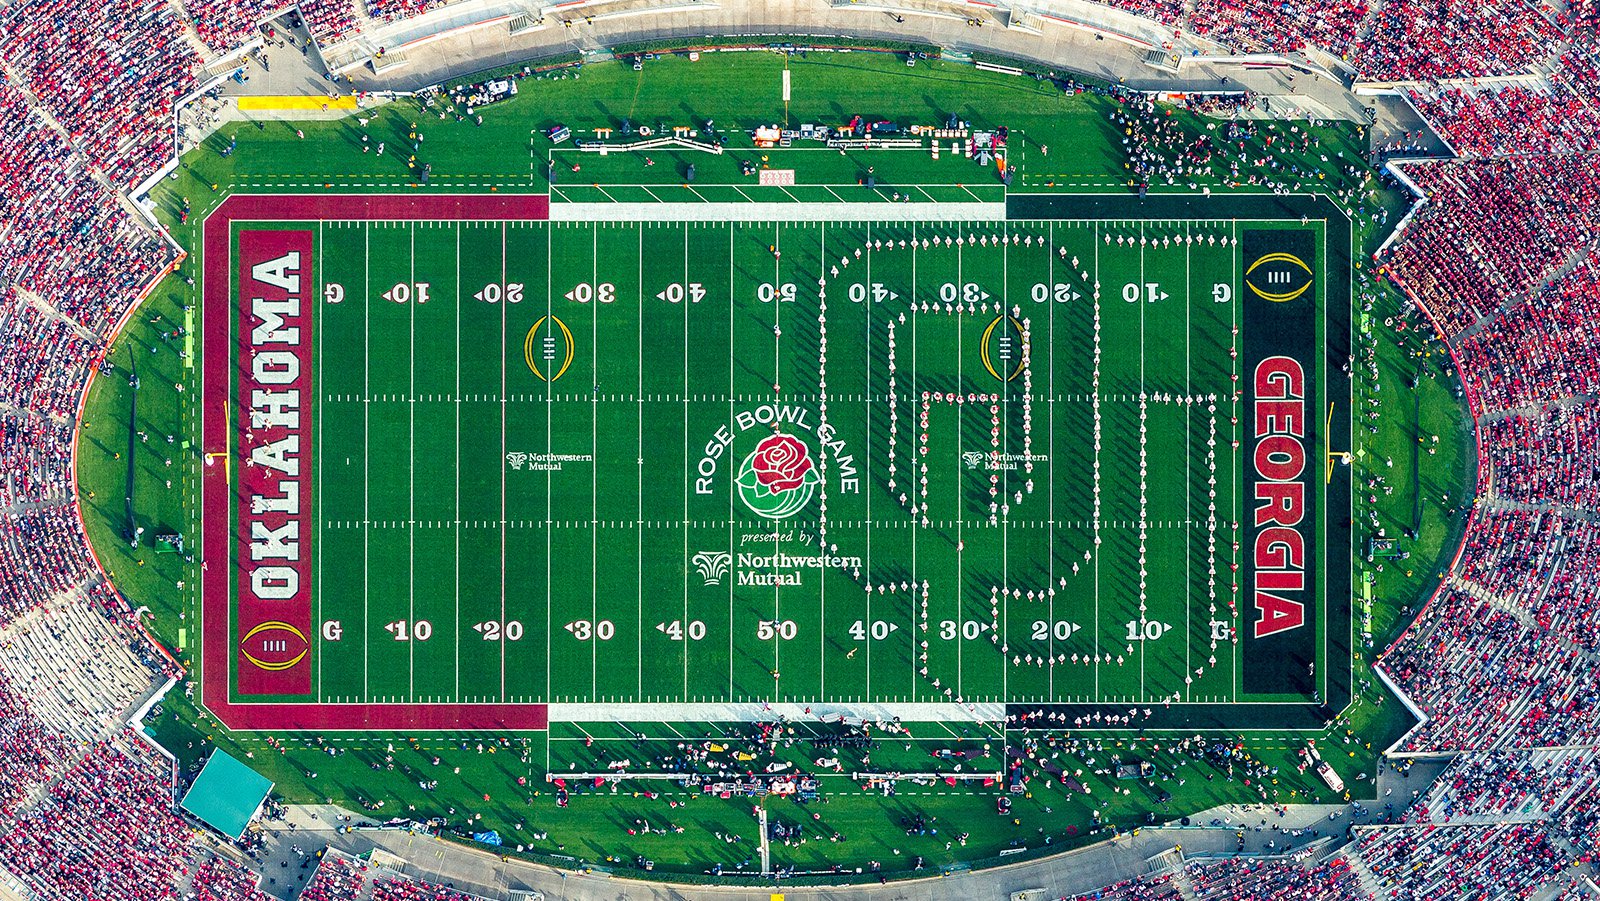 The Oklahoma University band cheers proudly in their cardinal and cream regalia, forming the letters 'OU' on the field of the iconic Rose Bowl Stadium and showcasing their enthusiasm for the Sooners during the historic 2018 Rose Bowl Game